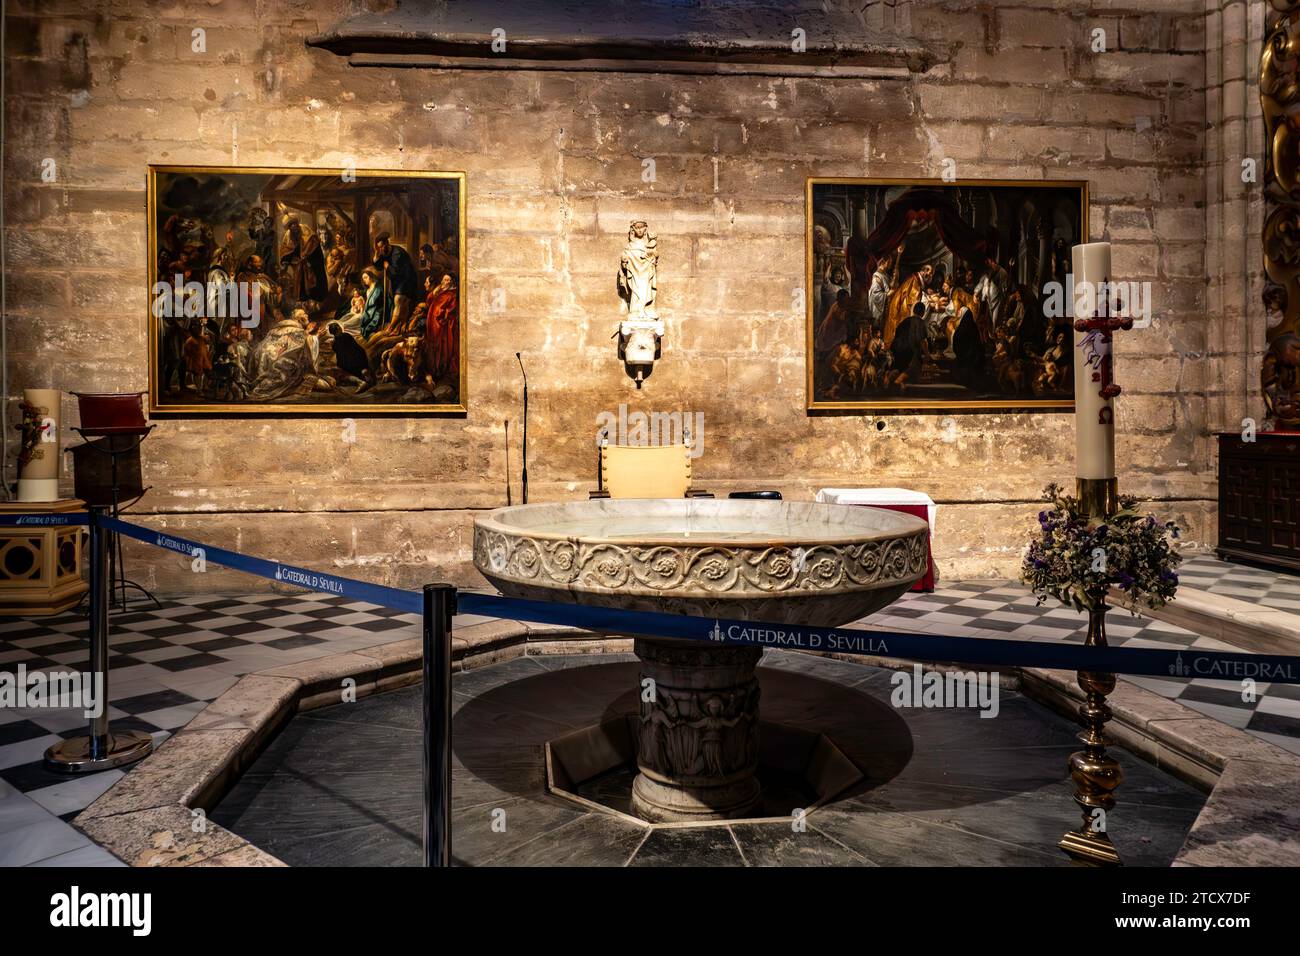 A serene baptismal chamber in Seville Cathedral featuring a marble font, religious paintings, and an elegant candle, capturing the sacred atmosphere. Stock Photo